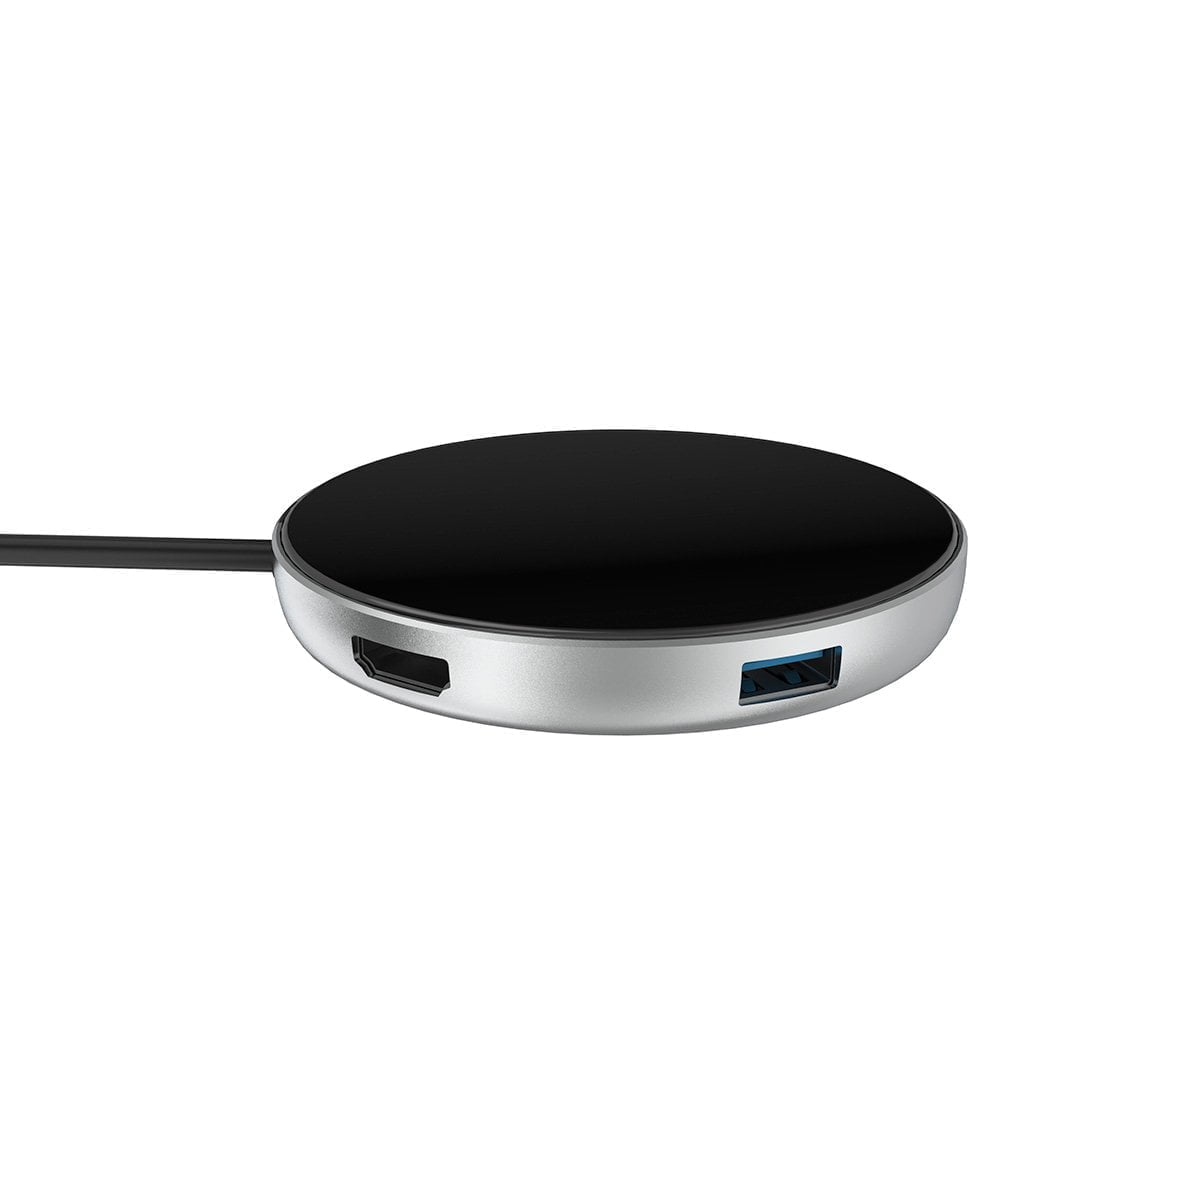 Jcp6244 Usb C Hub Wireless Charger &Lt;Div Class=&Quot;Product__Images One-Half Column Medium-Down--One-Whole&Quot;&Gt; &Lt;H1 Class=&Quot;Product_Name Title&Quot;&Gt;Usb-C Hub With Wireless Charger&Lt;/H1&Gt; &Lt;/Div&Gt; Keep Your Mobile Device Charged And Your Accessories Connected With The Usb-C Hub With Wireless Charger. This High-Performance Hybrid Detects And Delivers The Optimum Wireless Charging Speed* For Your Device (5W, 7.5W Or 10W) And Can Extend Or Mirror Your Display To A 4K Monitor Or Tv. The Usb 3.0 And Dual Usb 2.0 Ports Provide A High-Speed Connection For All Your Usb Peripheral Devices Such As Hard Drives And Printers, And The Usb-C Power Delivery Input Keeps Your Devices Powered Up While You Work. &Lt;Ul&Gt; &Lt;Li&Gt;Adaptive High-Speed Wireless Charging&Lt;/Li&Gt; &Lt;Li&Gt;Hdmi Port Outputs Crisp 4K Video At 30Hz&Lt;/Li&Gt; &Lt;Li&Gt;High-Speed Usb 3.0 Port And Two Usb 2.0 Ports&Lt;/Li&Gt; &Lt;Li&Gt;Usb-C Pd Pass-Through Charging Up To 60W&Lt;/Li&Gt; &Lt;Li&Gt;Durable Aluminum Shell&Lt;/Li&Gt; &Lt;/Ul&Gt; &Lt;Small&Gt;*Requires At Least 9V/1.5A From The Host Device Or Pd Input For Full-Speed Wireless Charging.&Lt;/Small&Gt; Jcpal Usb-C Hub With Wireless Charger Jcpal - Jcp6224